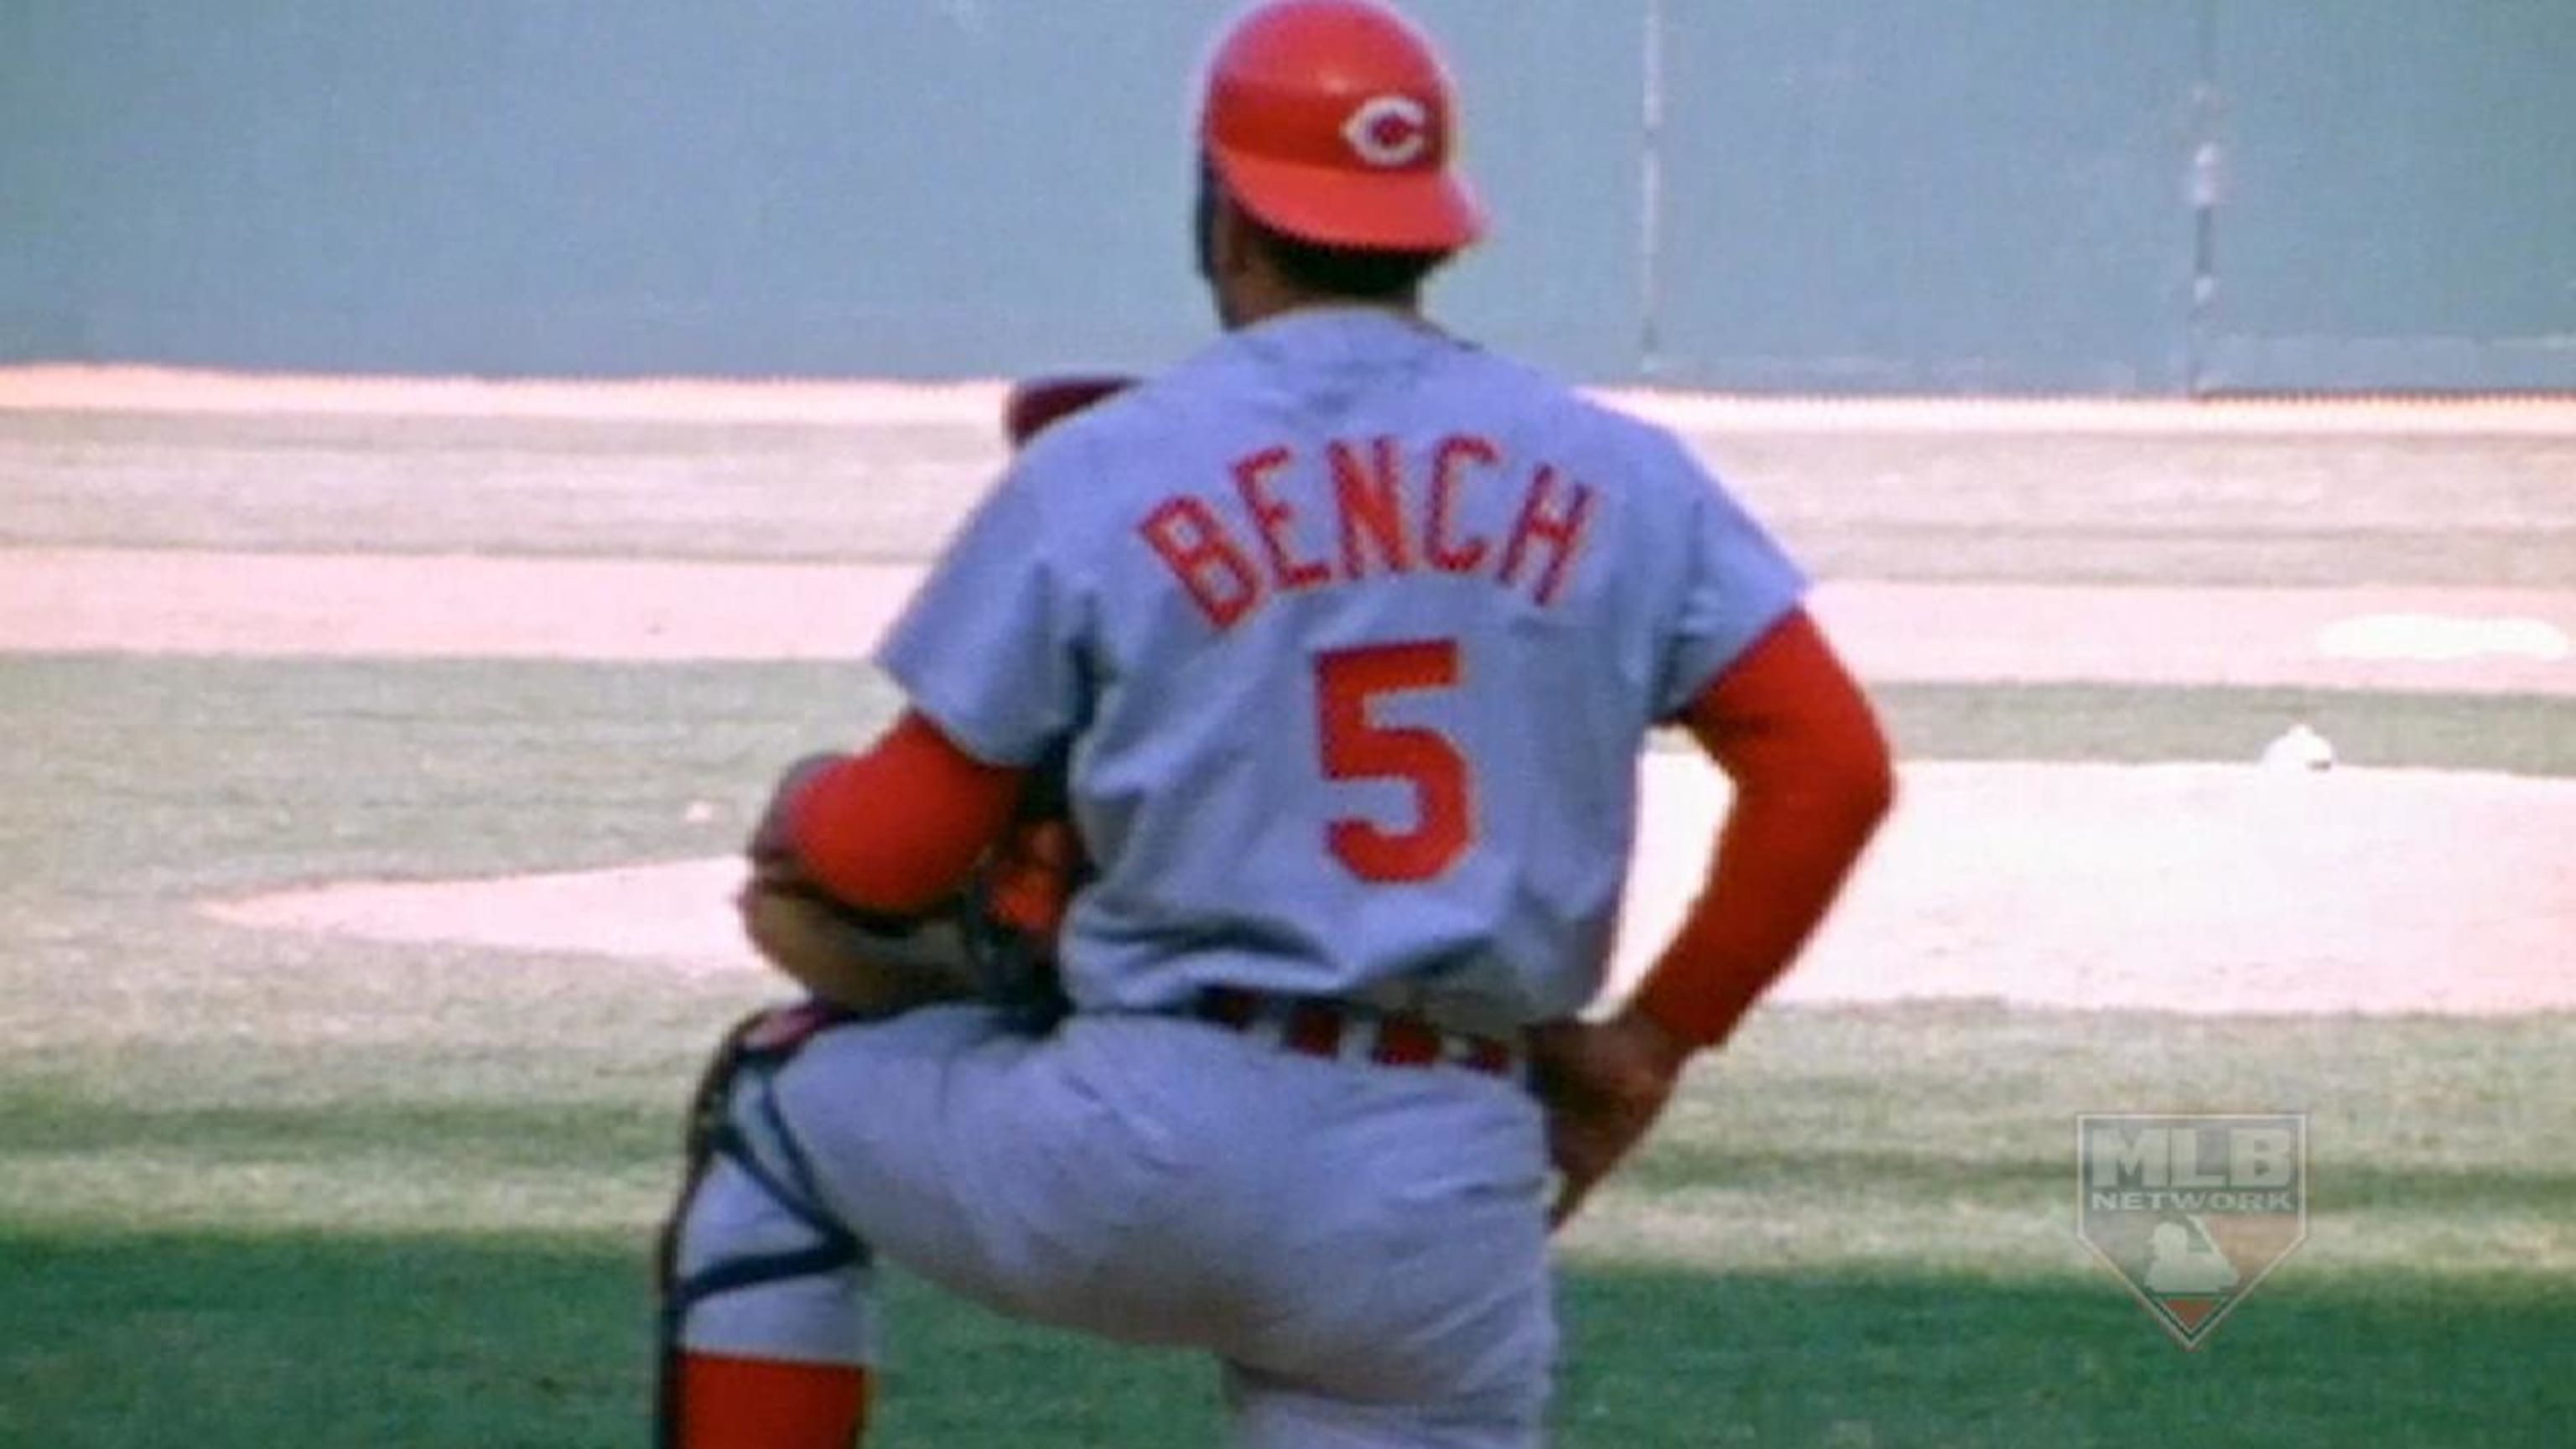 Cincinnati Reds - Today in Reds history,1967: Johnny Bench makes his major  league debut at 19-years-old and goes hitless in three trips to the plate.  Bench will go on to collect 2048